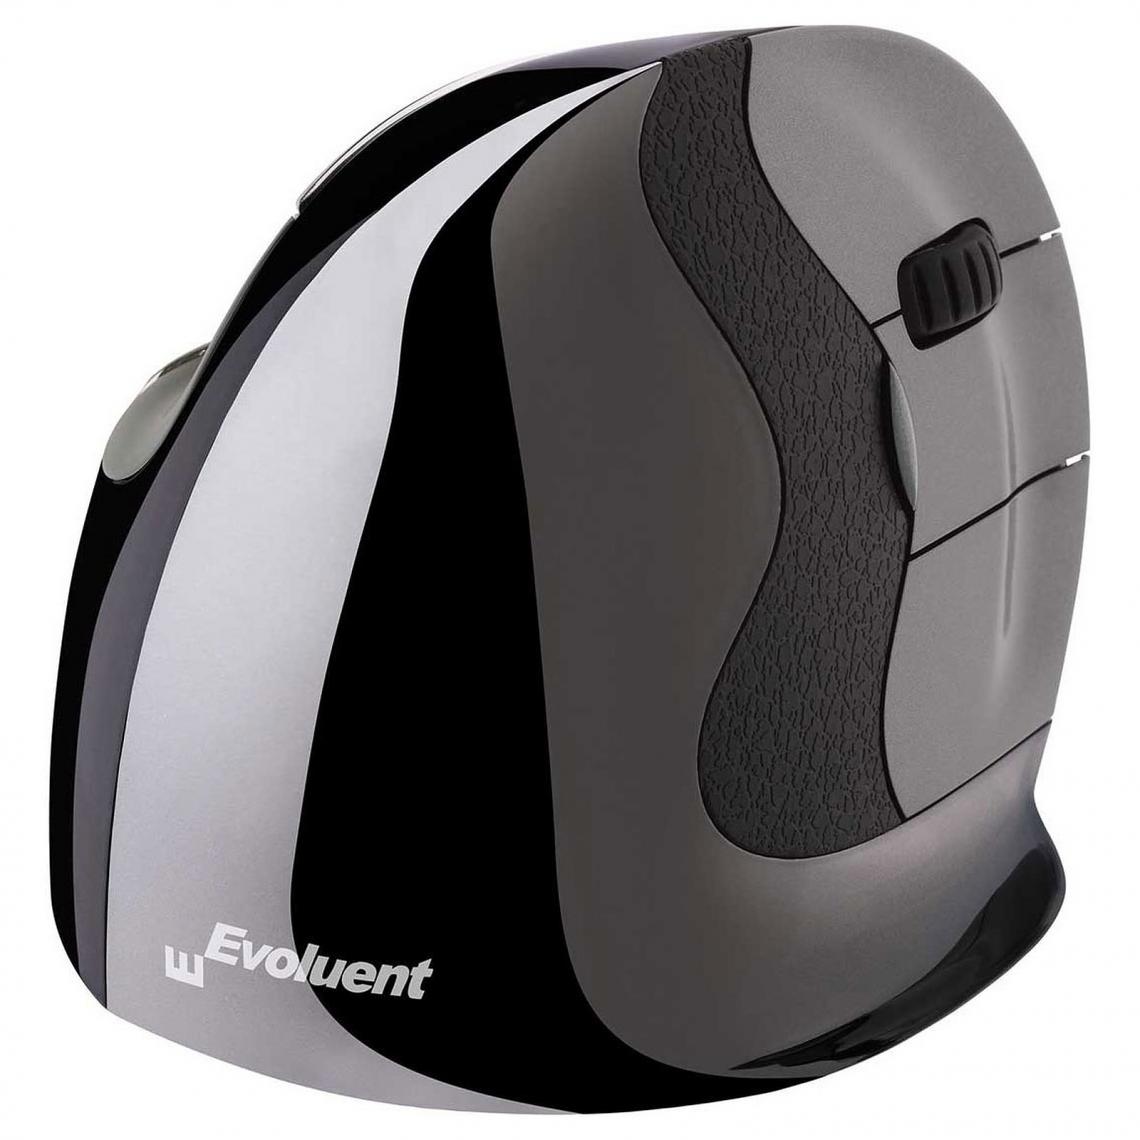 Evoluent - VerticalMouse D Wireless Large - Souris